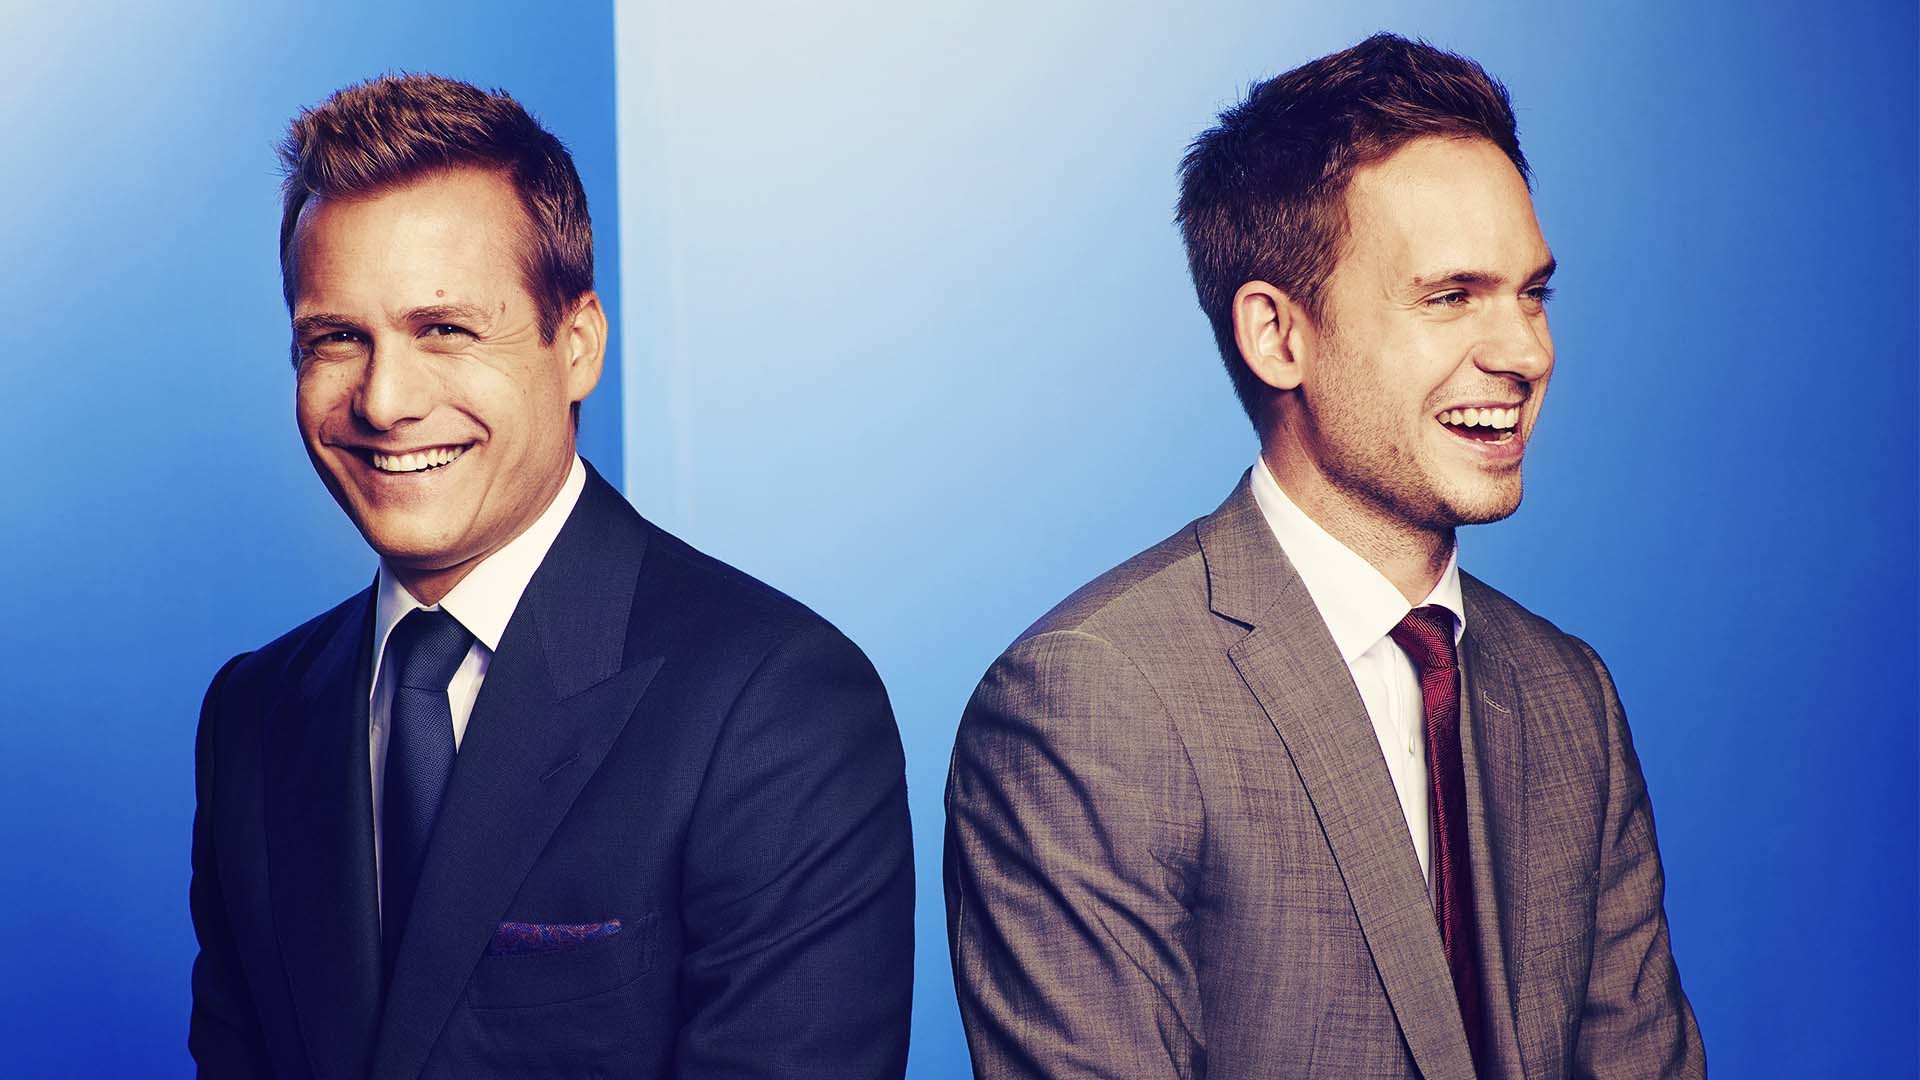 1920x1080 Suits images Harvey and Mike HD wallpaper and background photos